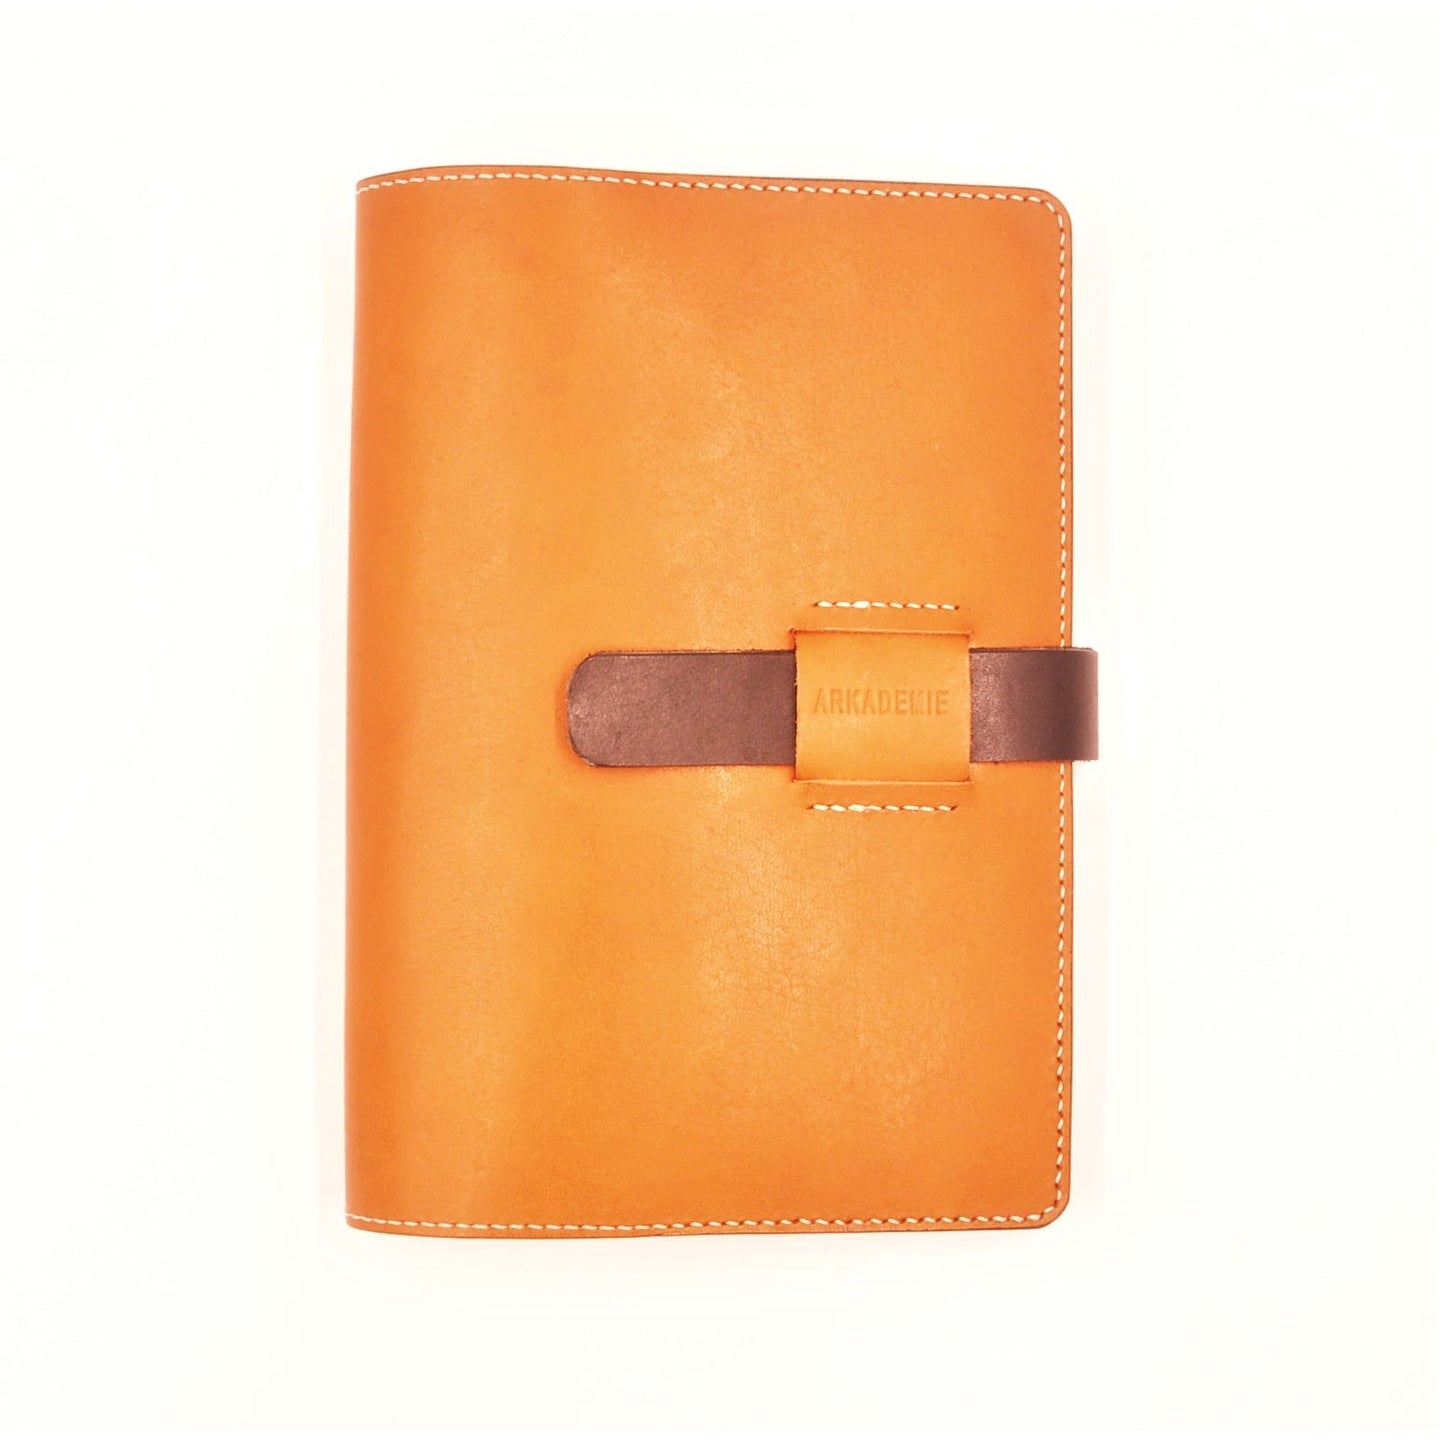 HERITAGE A5-P Leather Notebook Cover Duo-Tone